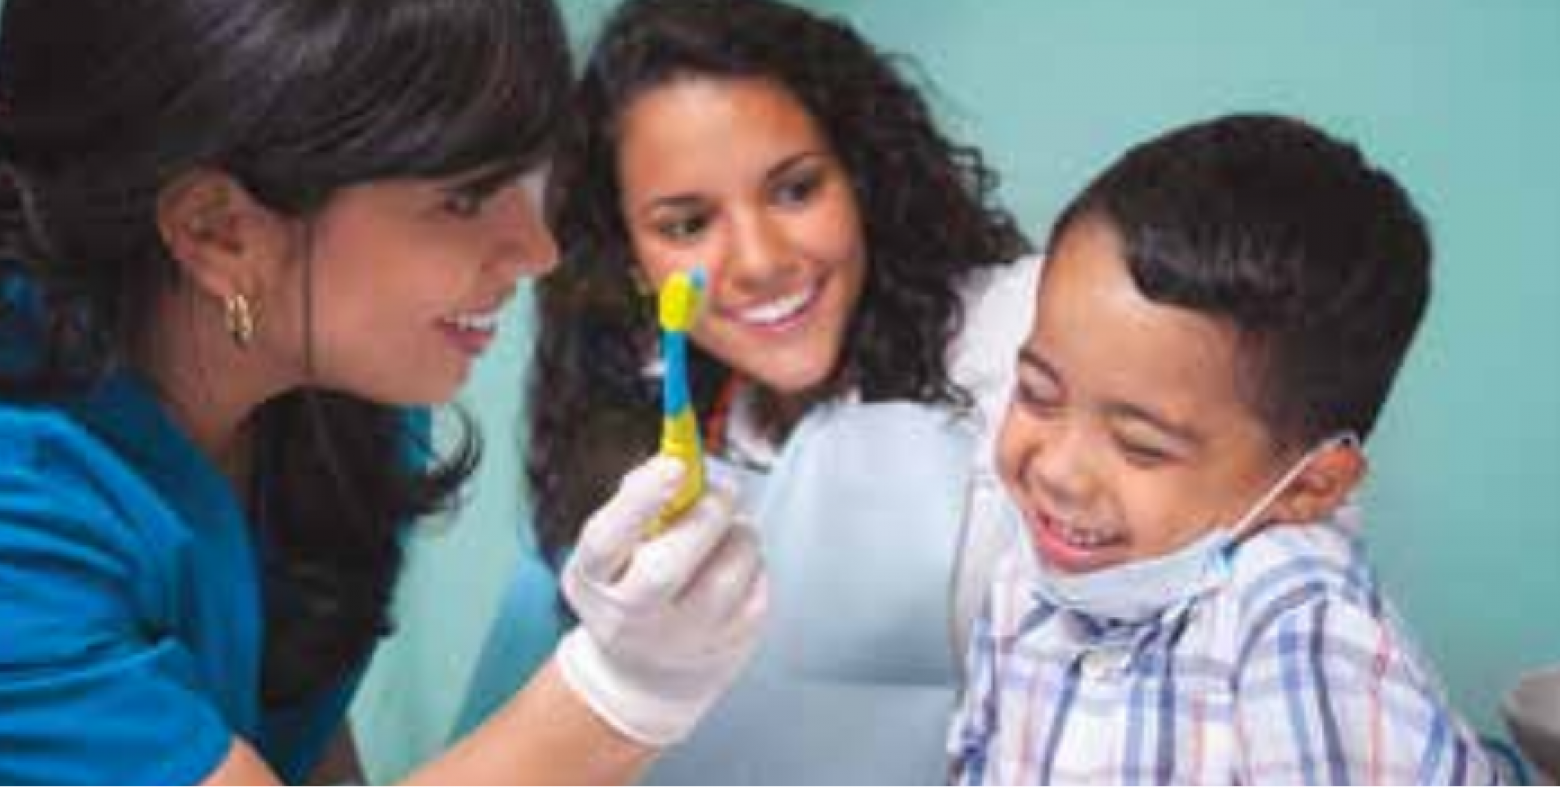 Dentist helping child with toothbrush